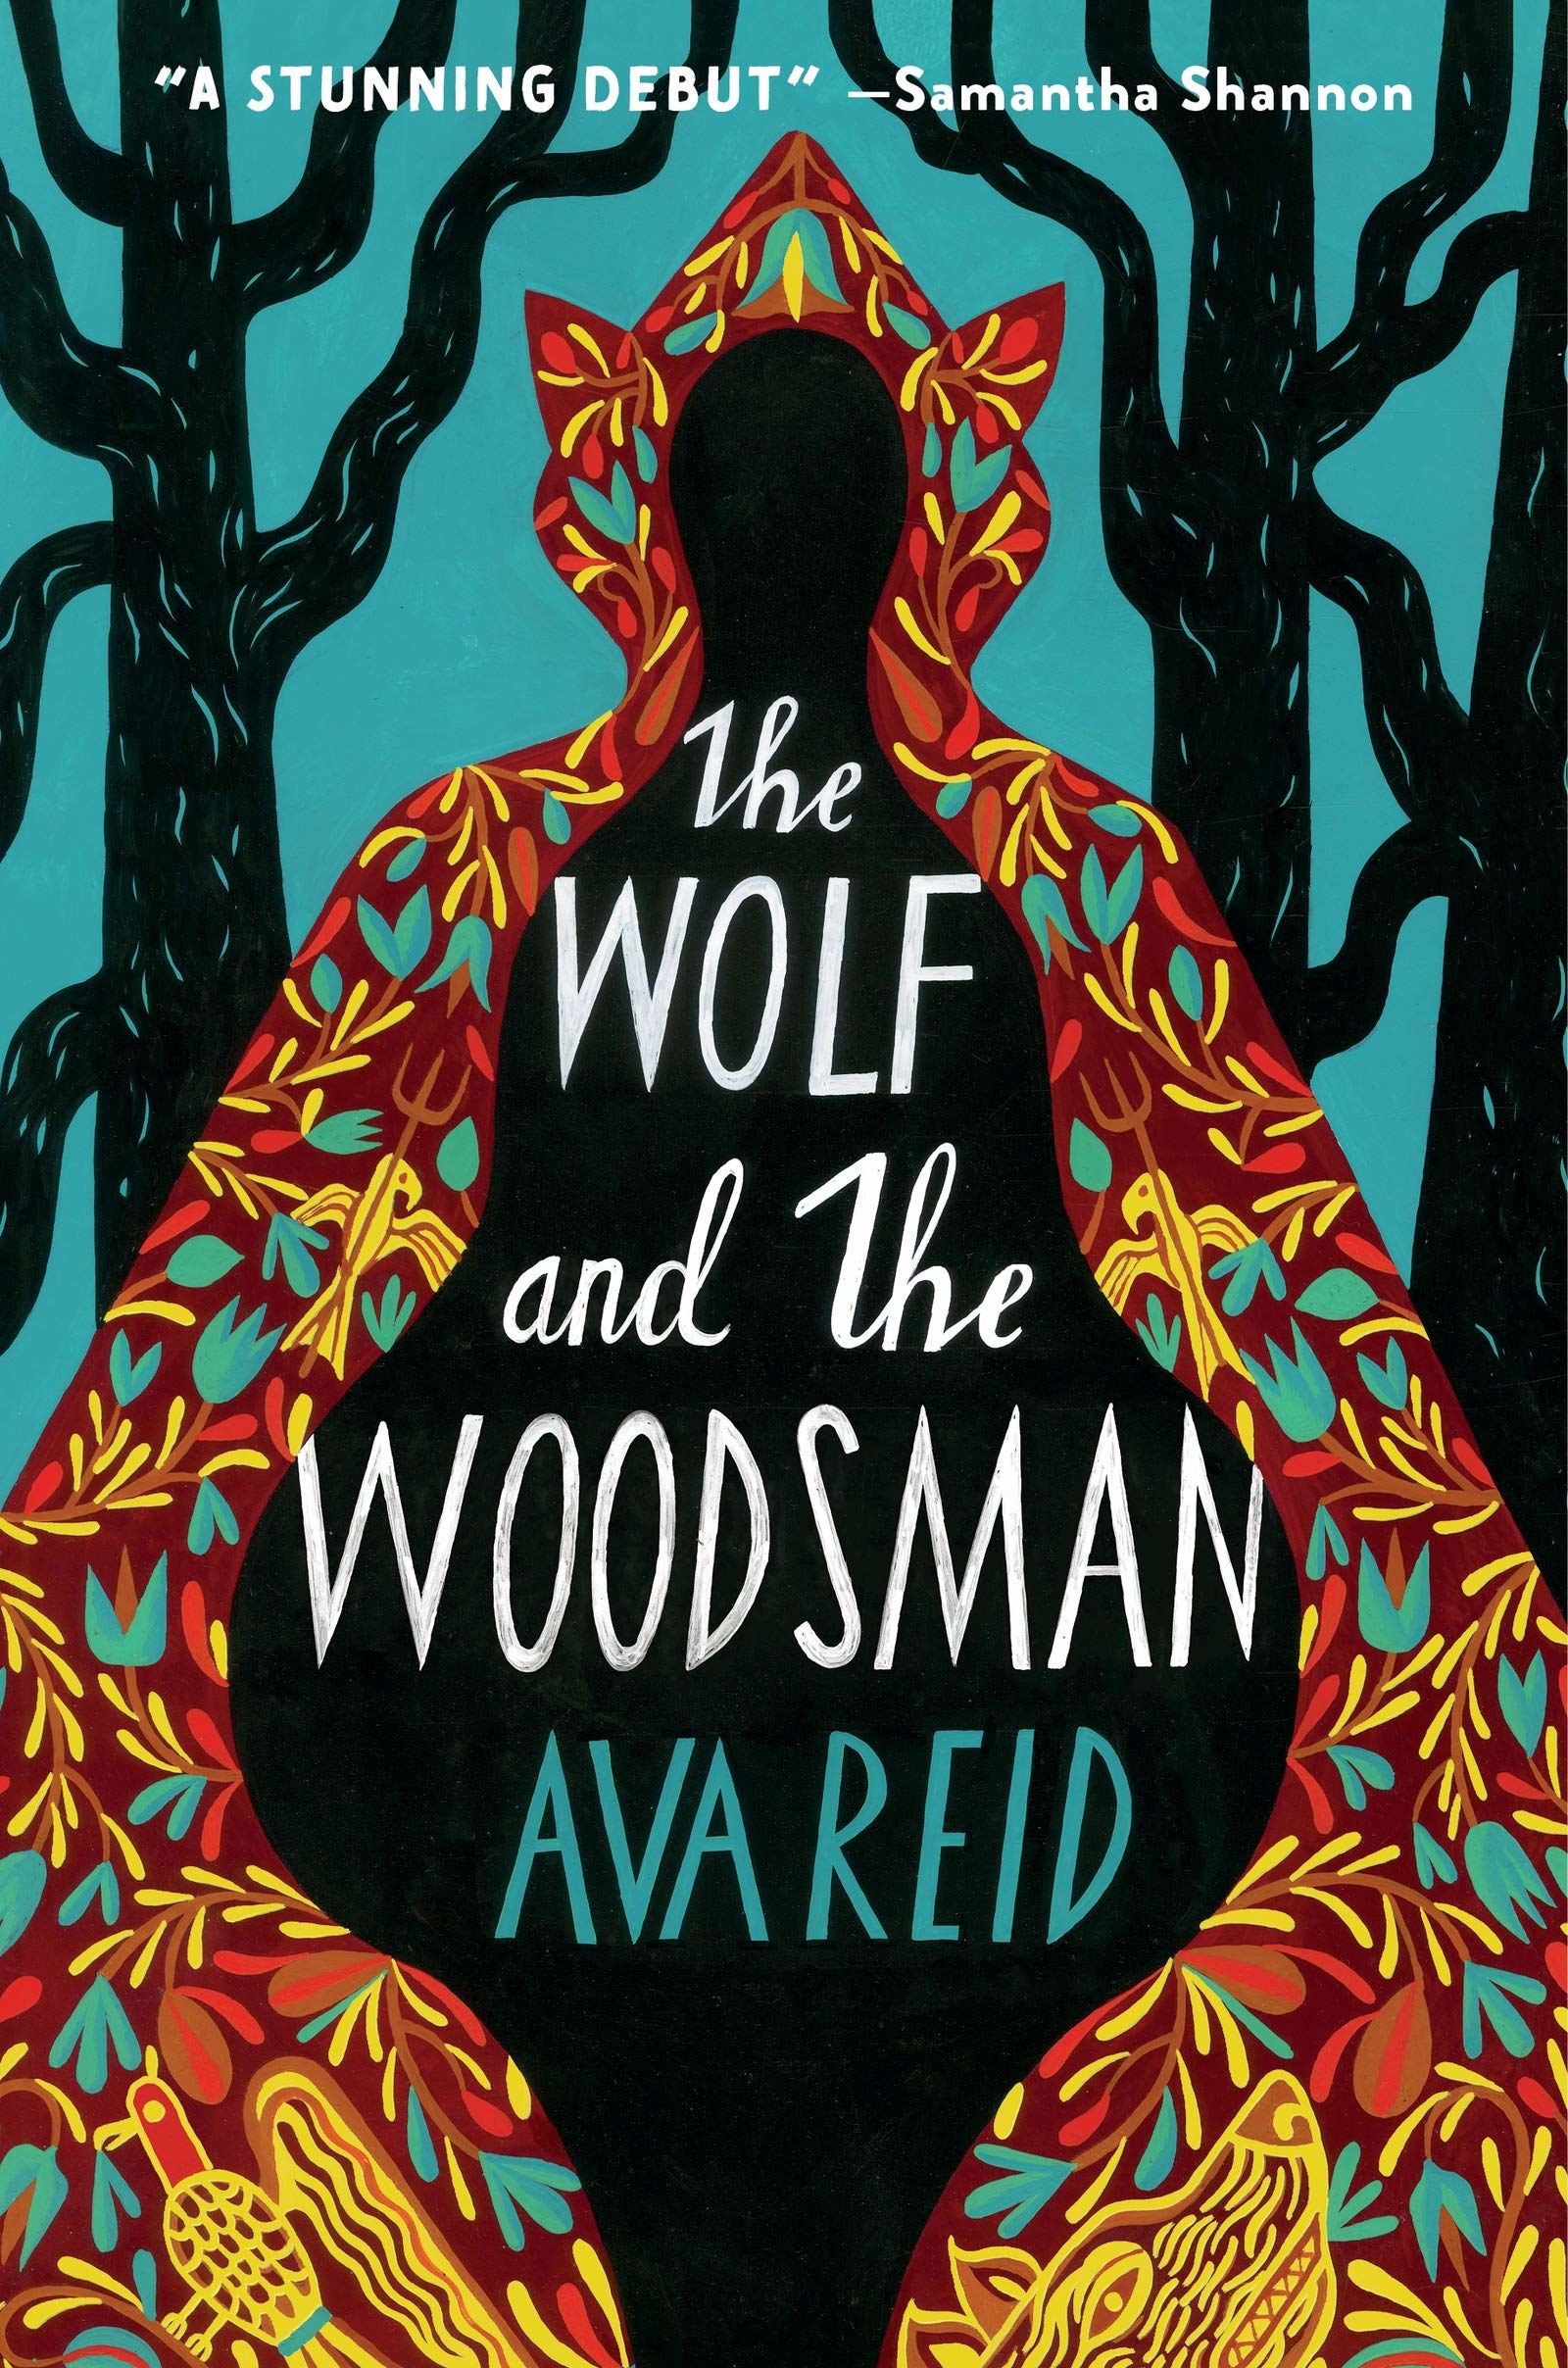 The Wolf and the Woodsman book cover. Book by Ava Reid.